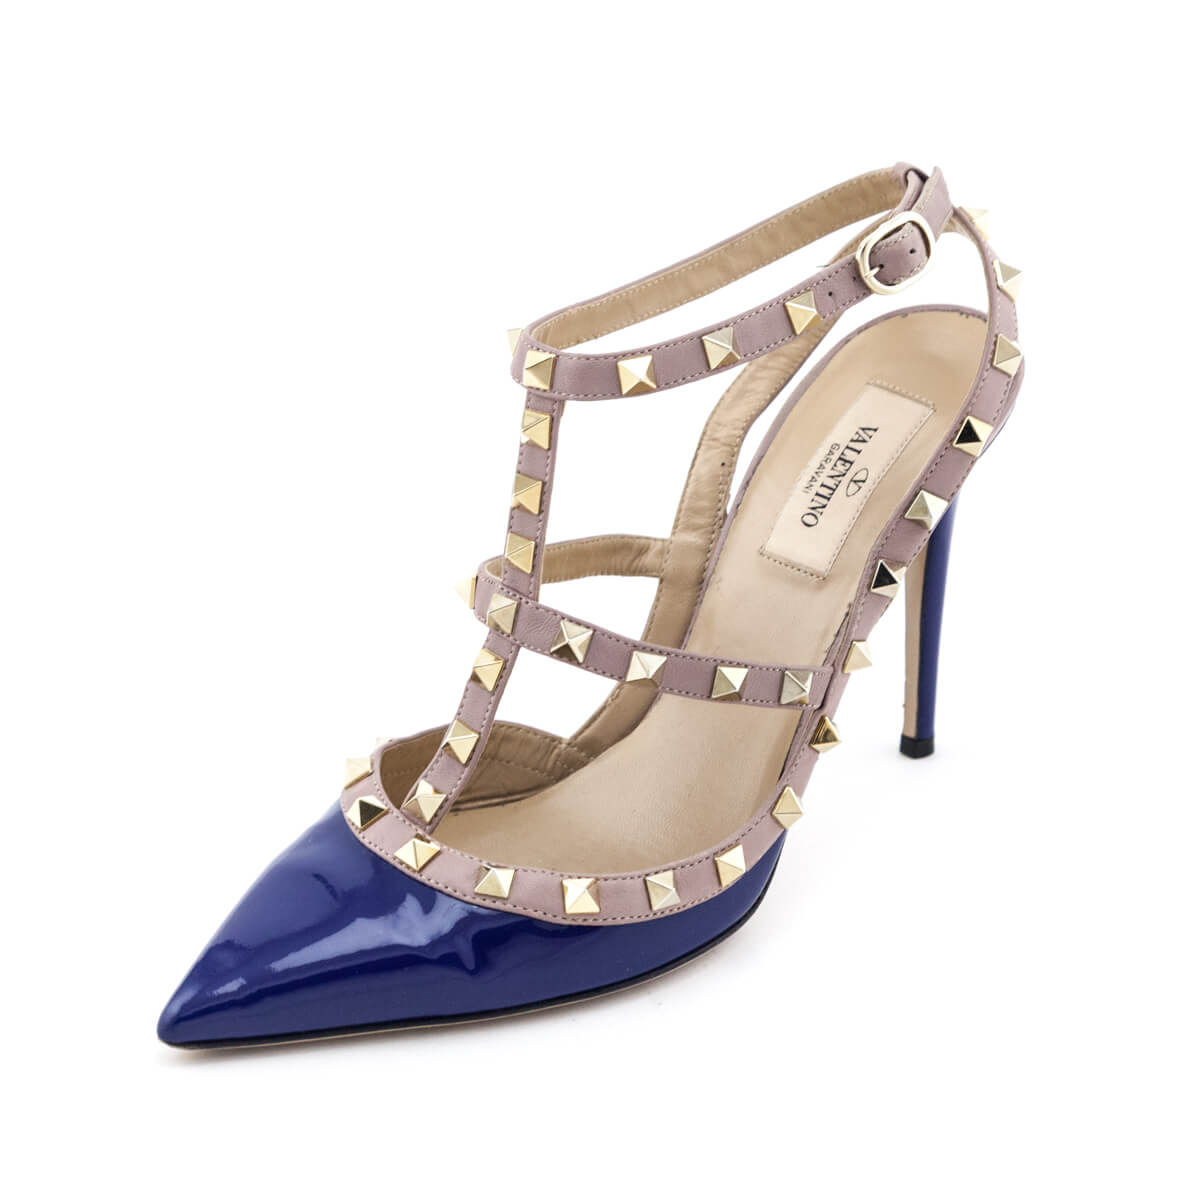 Valentino Blue Patent Rockstud Pumps Size US 10 | IT 40 - Love that Bag etc - Preowned Authentic Designer Handbags & Preloved Fashions